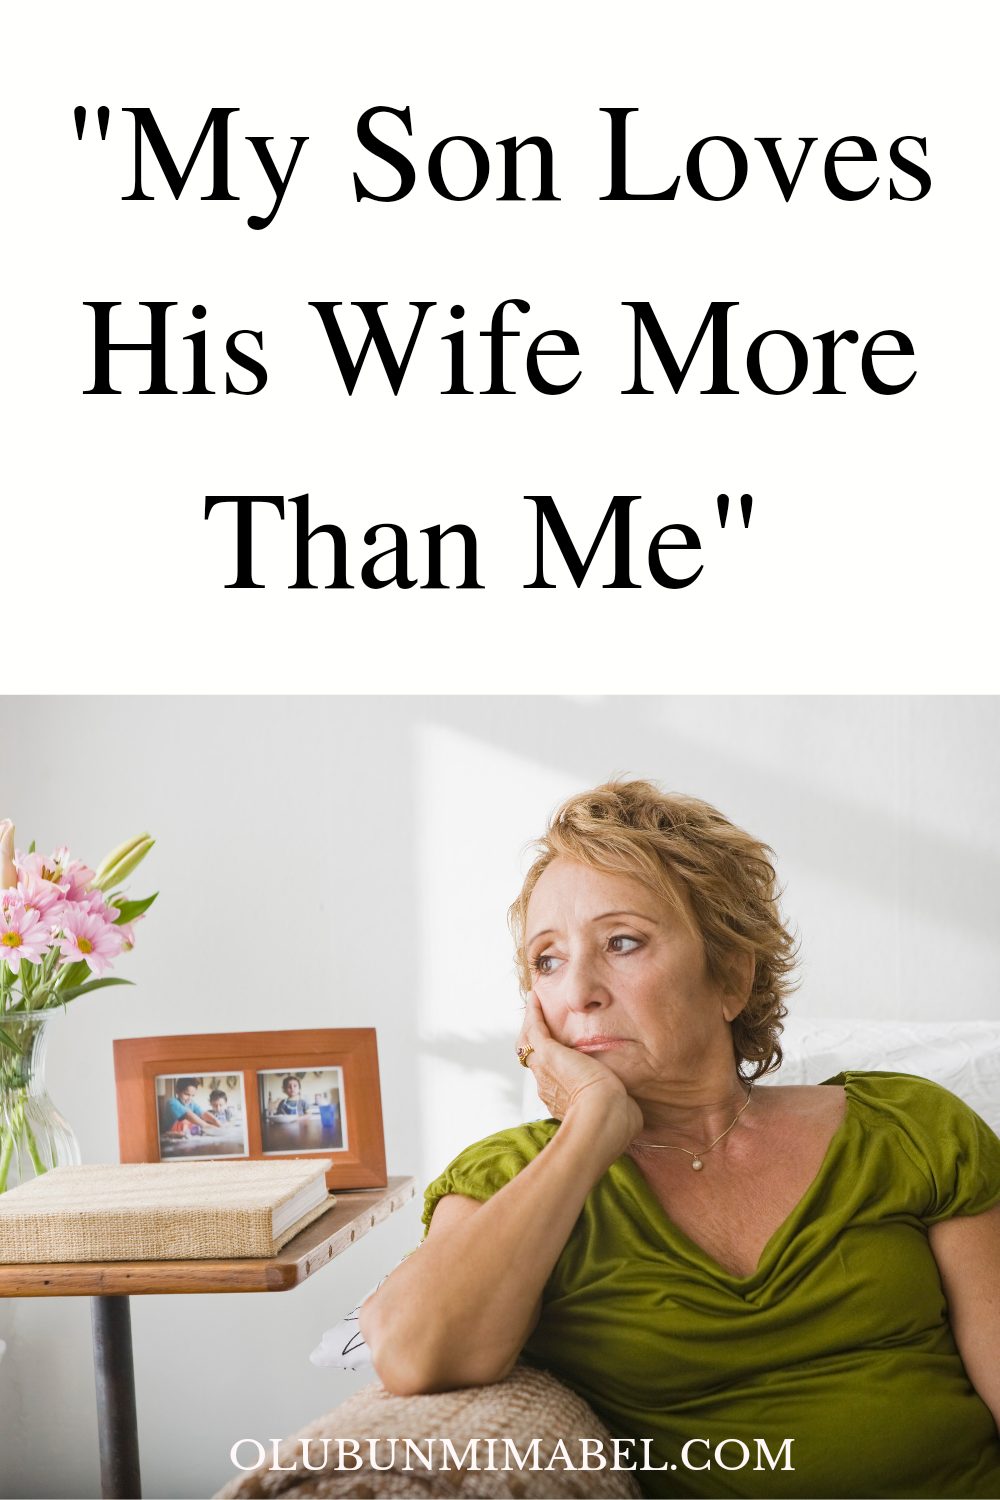 "My Son Loves His Wife More Than Me"